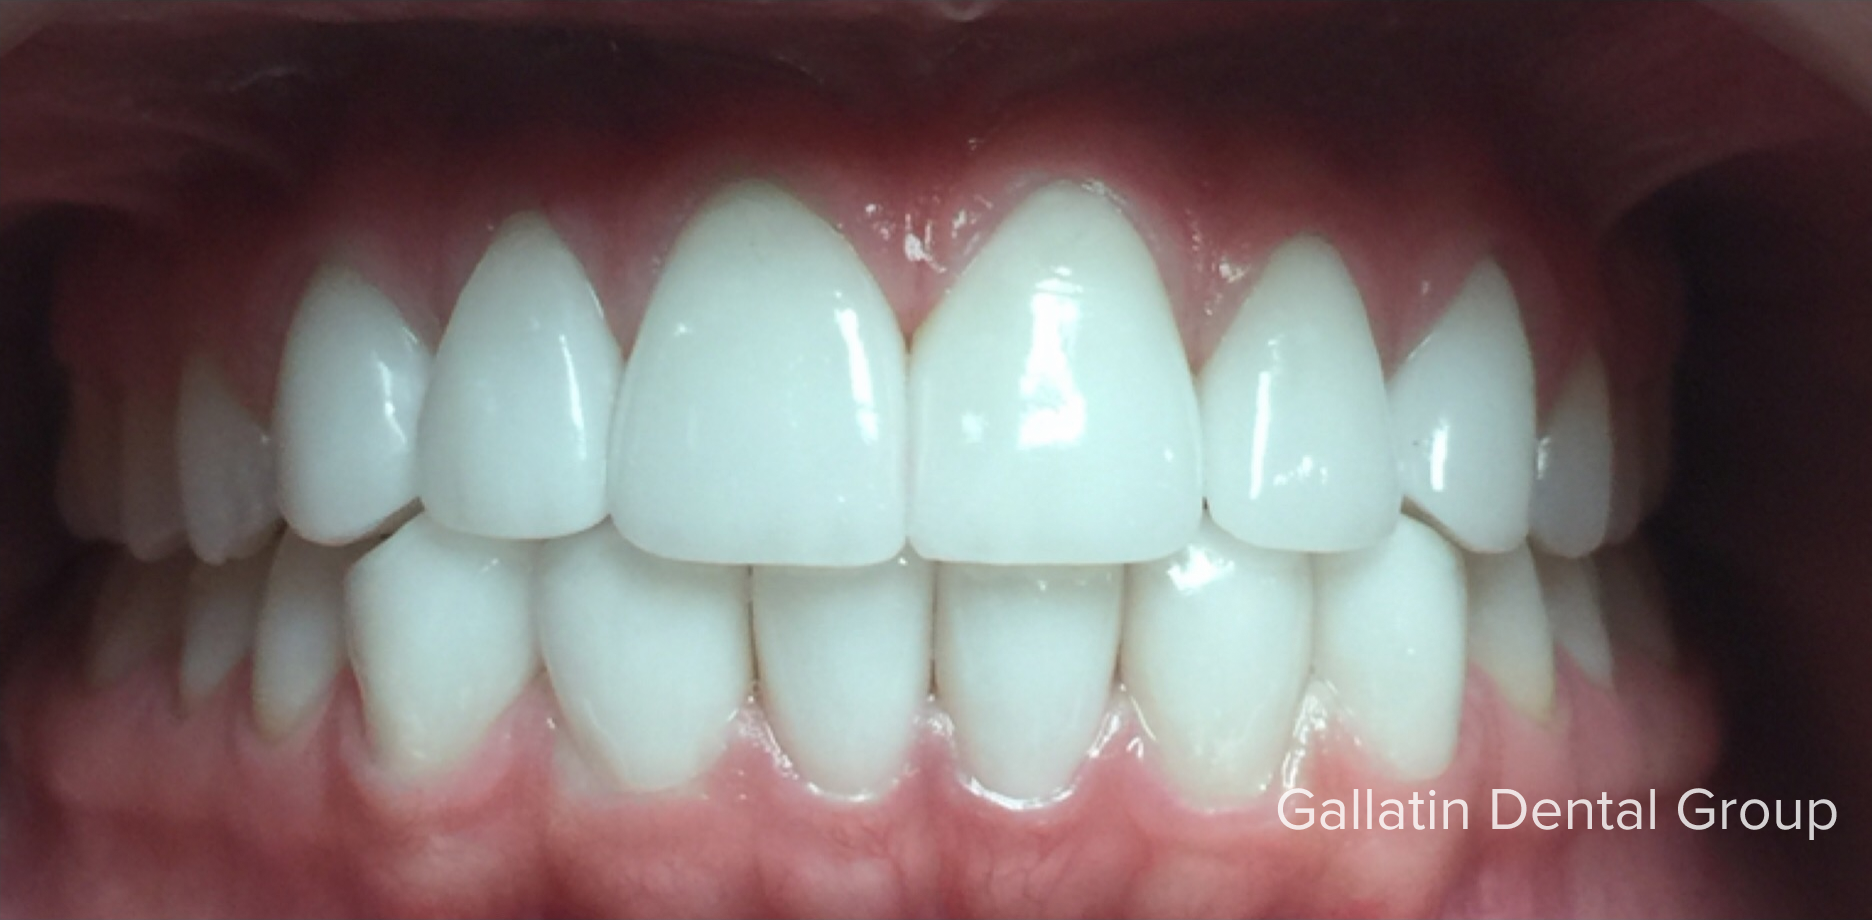 A close up of a person 's teeth taken by the callatri dental group